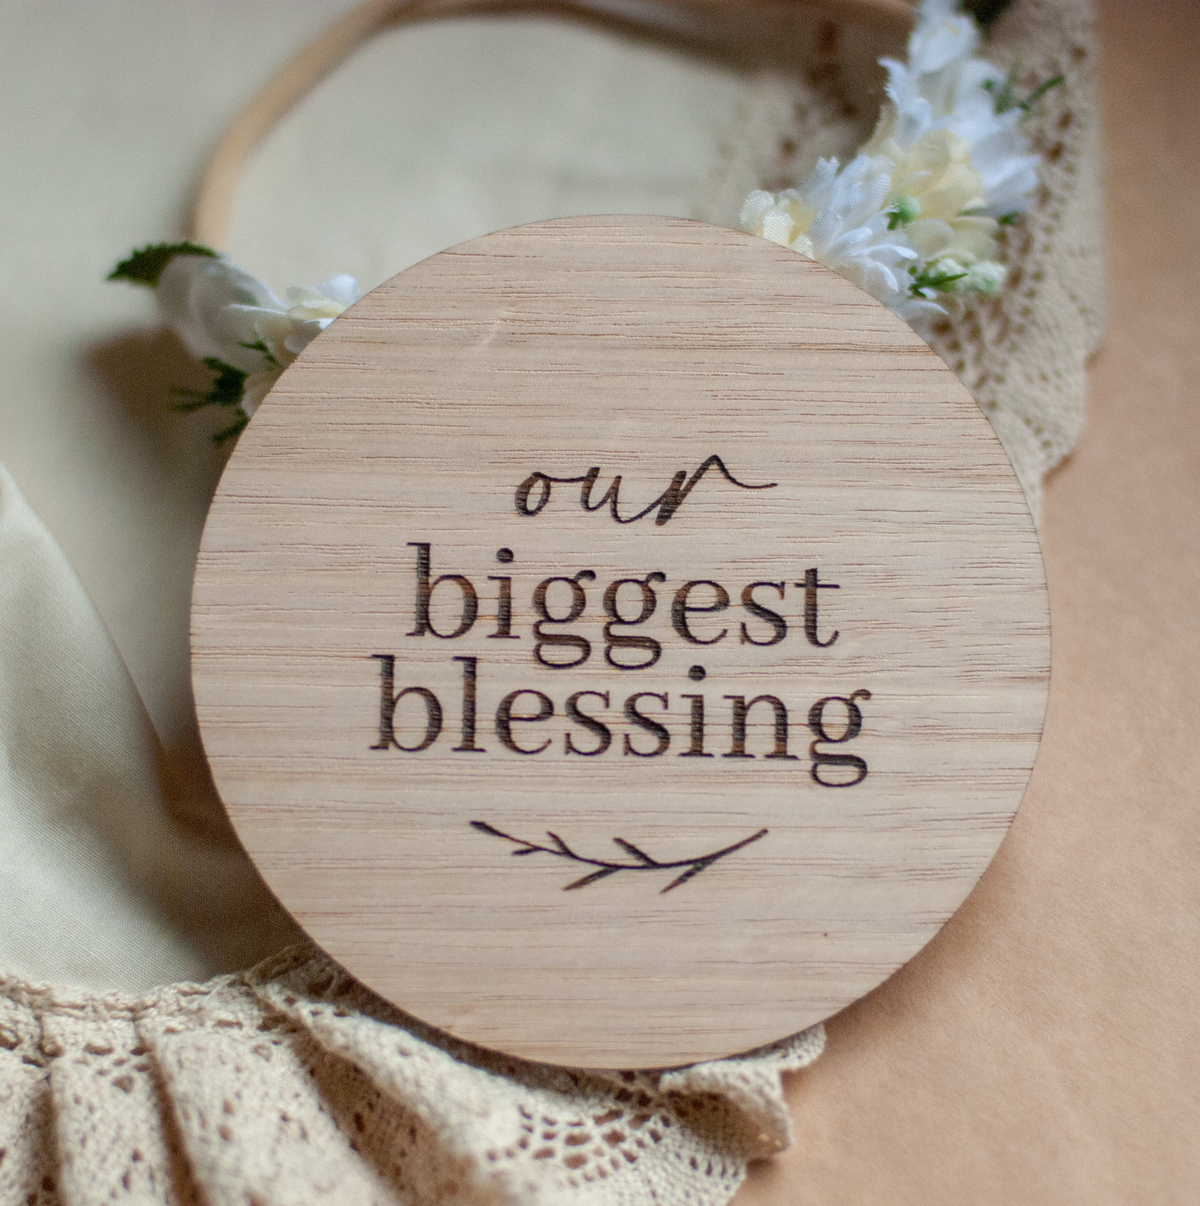 Our biggest blessing Christian birth or pregnancy announcement timber disk for nursery decor